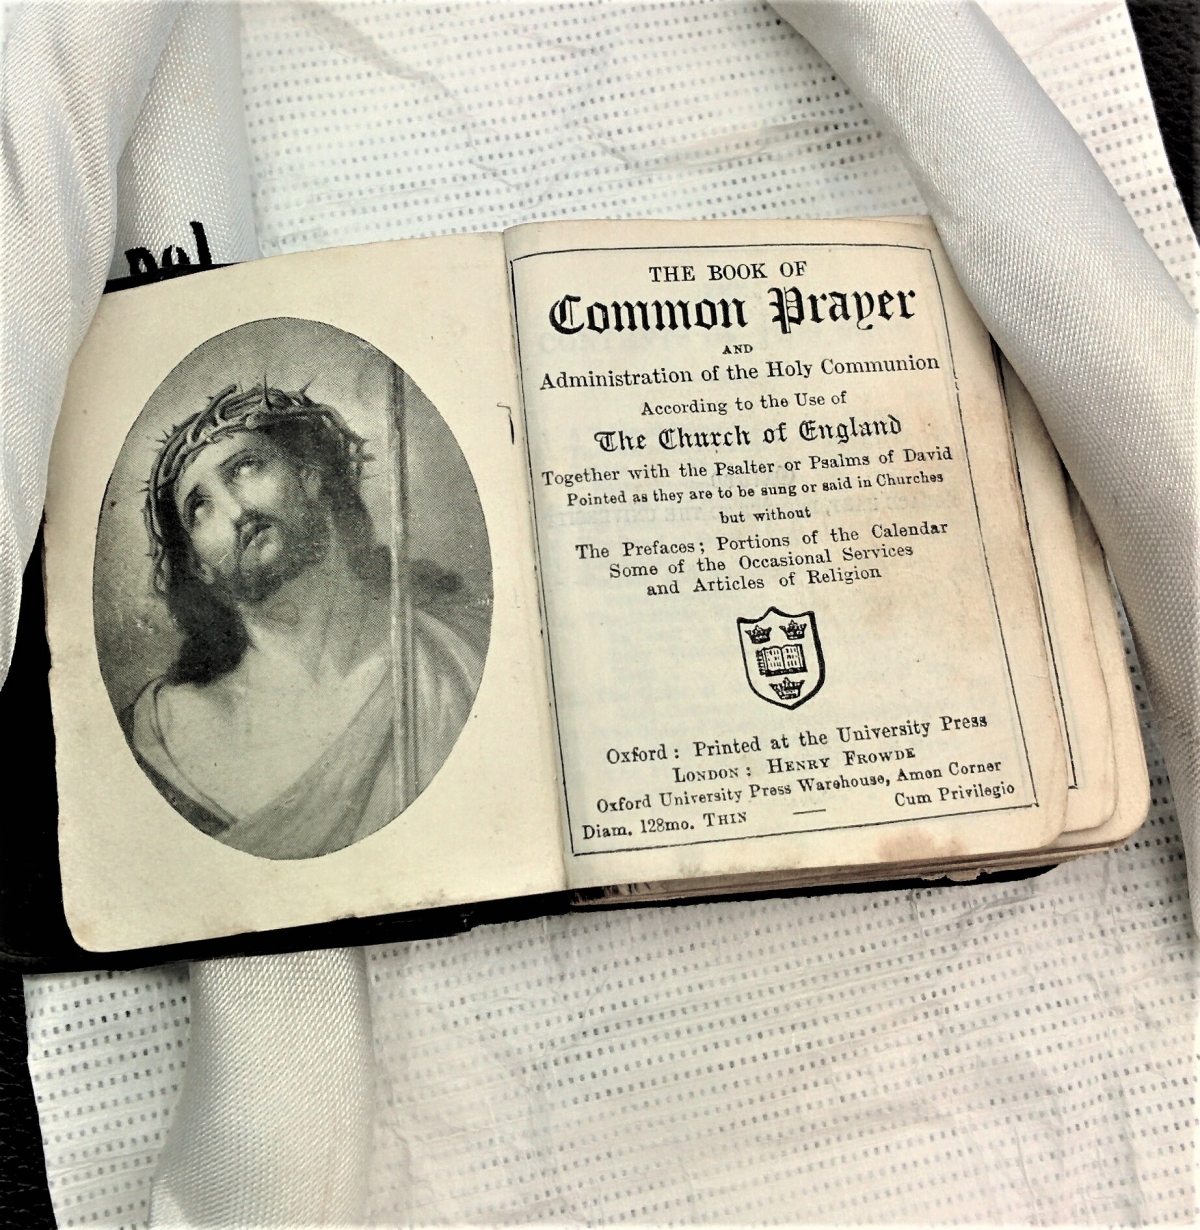 The Book of Common Prayer, open to the front page, lying on archival acid-free paper. Silver Book of Common Prayer at the Kinder Library.